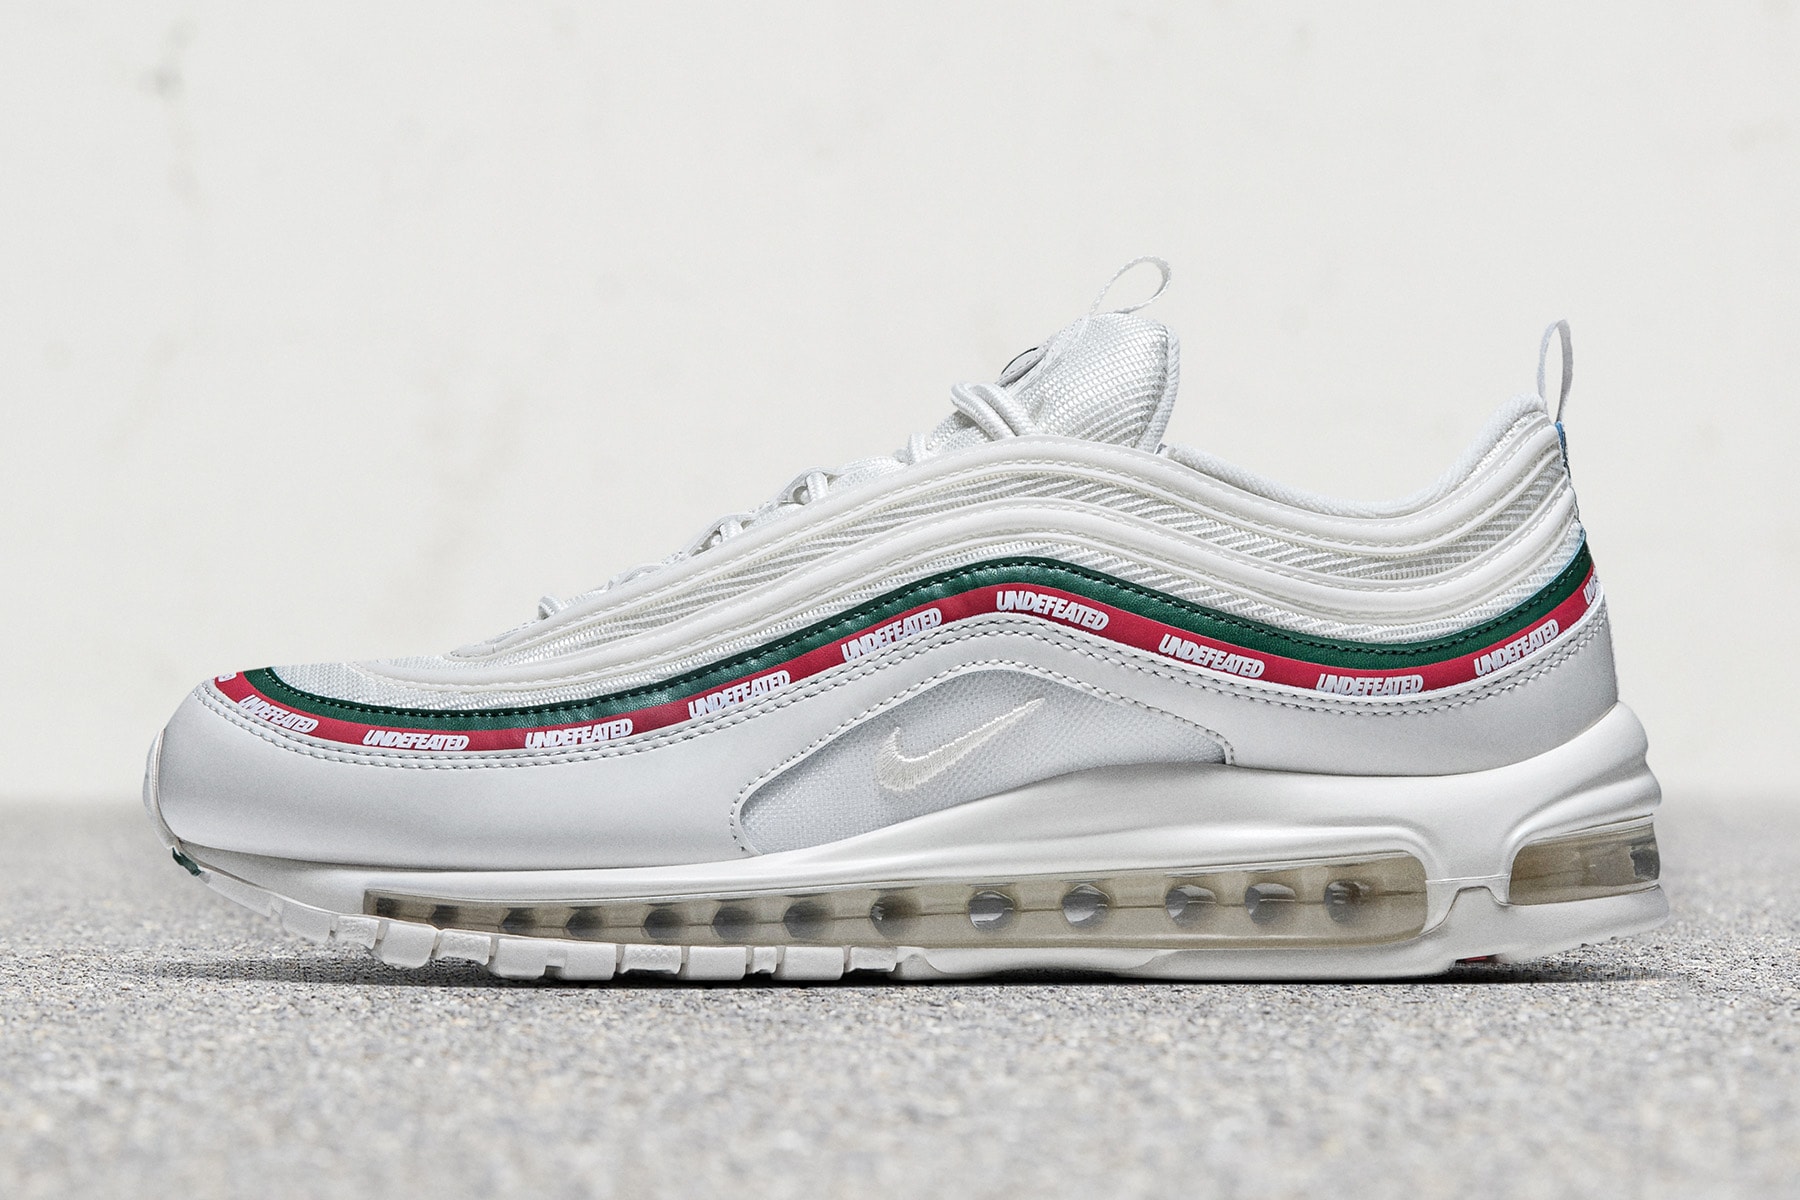 Nike x UNDEFEATED コラボ Air Max 97 の日本発売が遂に決定